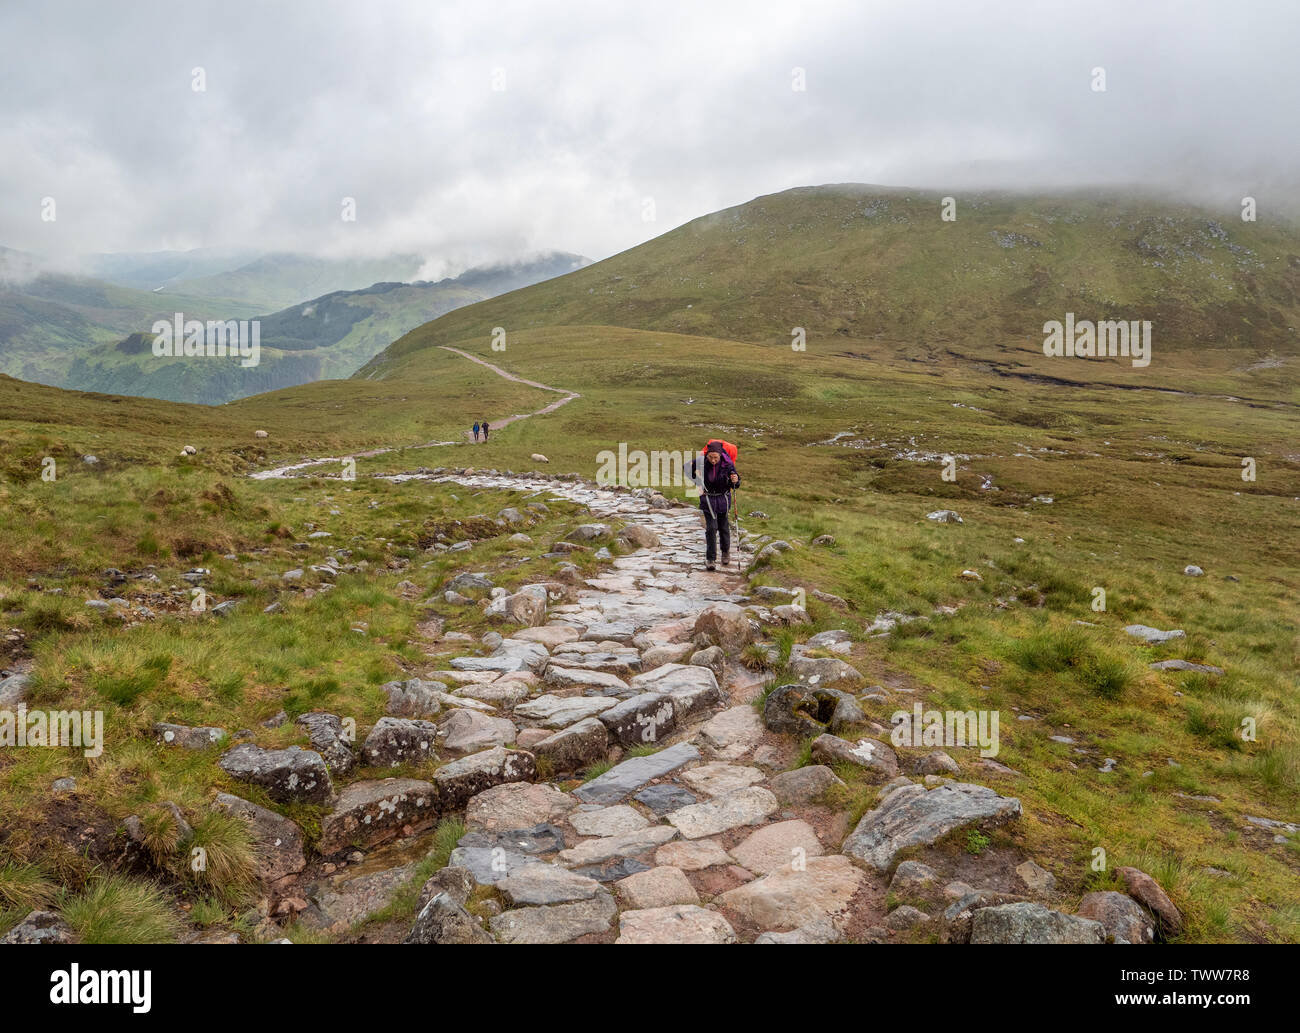 Walkers ascending the steep but well marked path to the summit of Ben Nevis in the Highlands of Scotland UK on a typically cloudy day Stock Photo